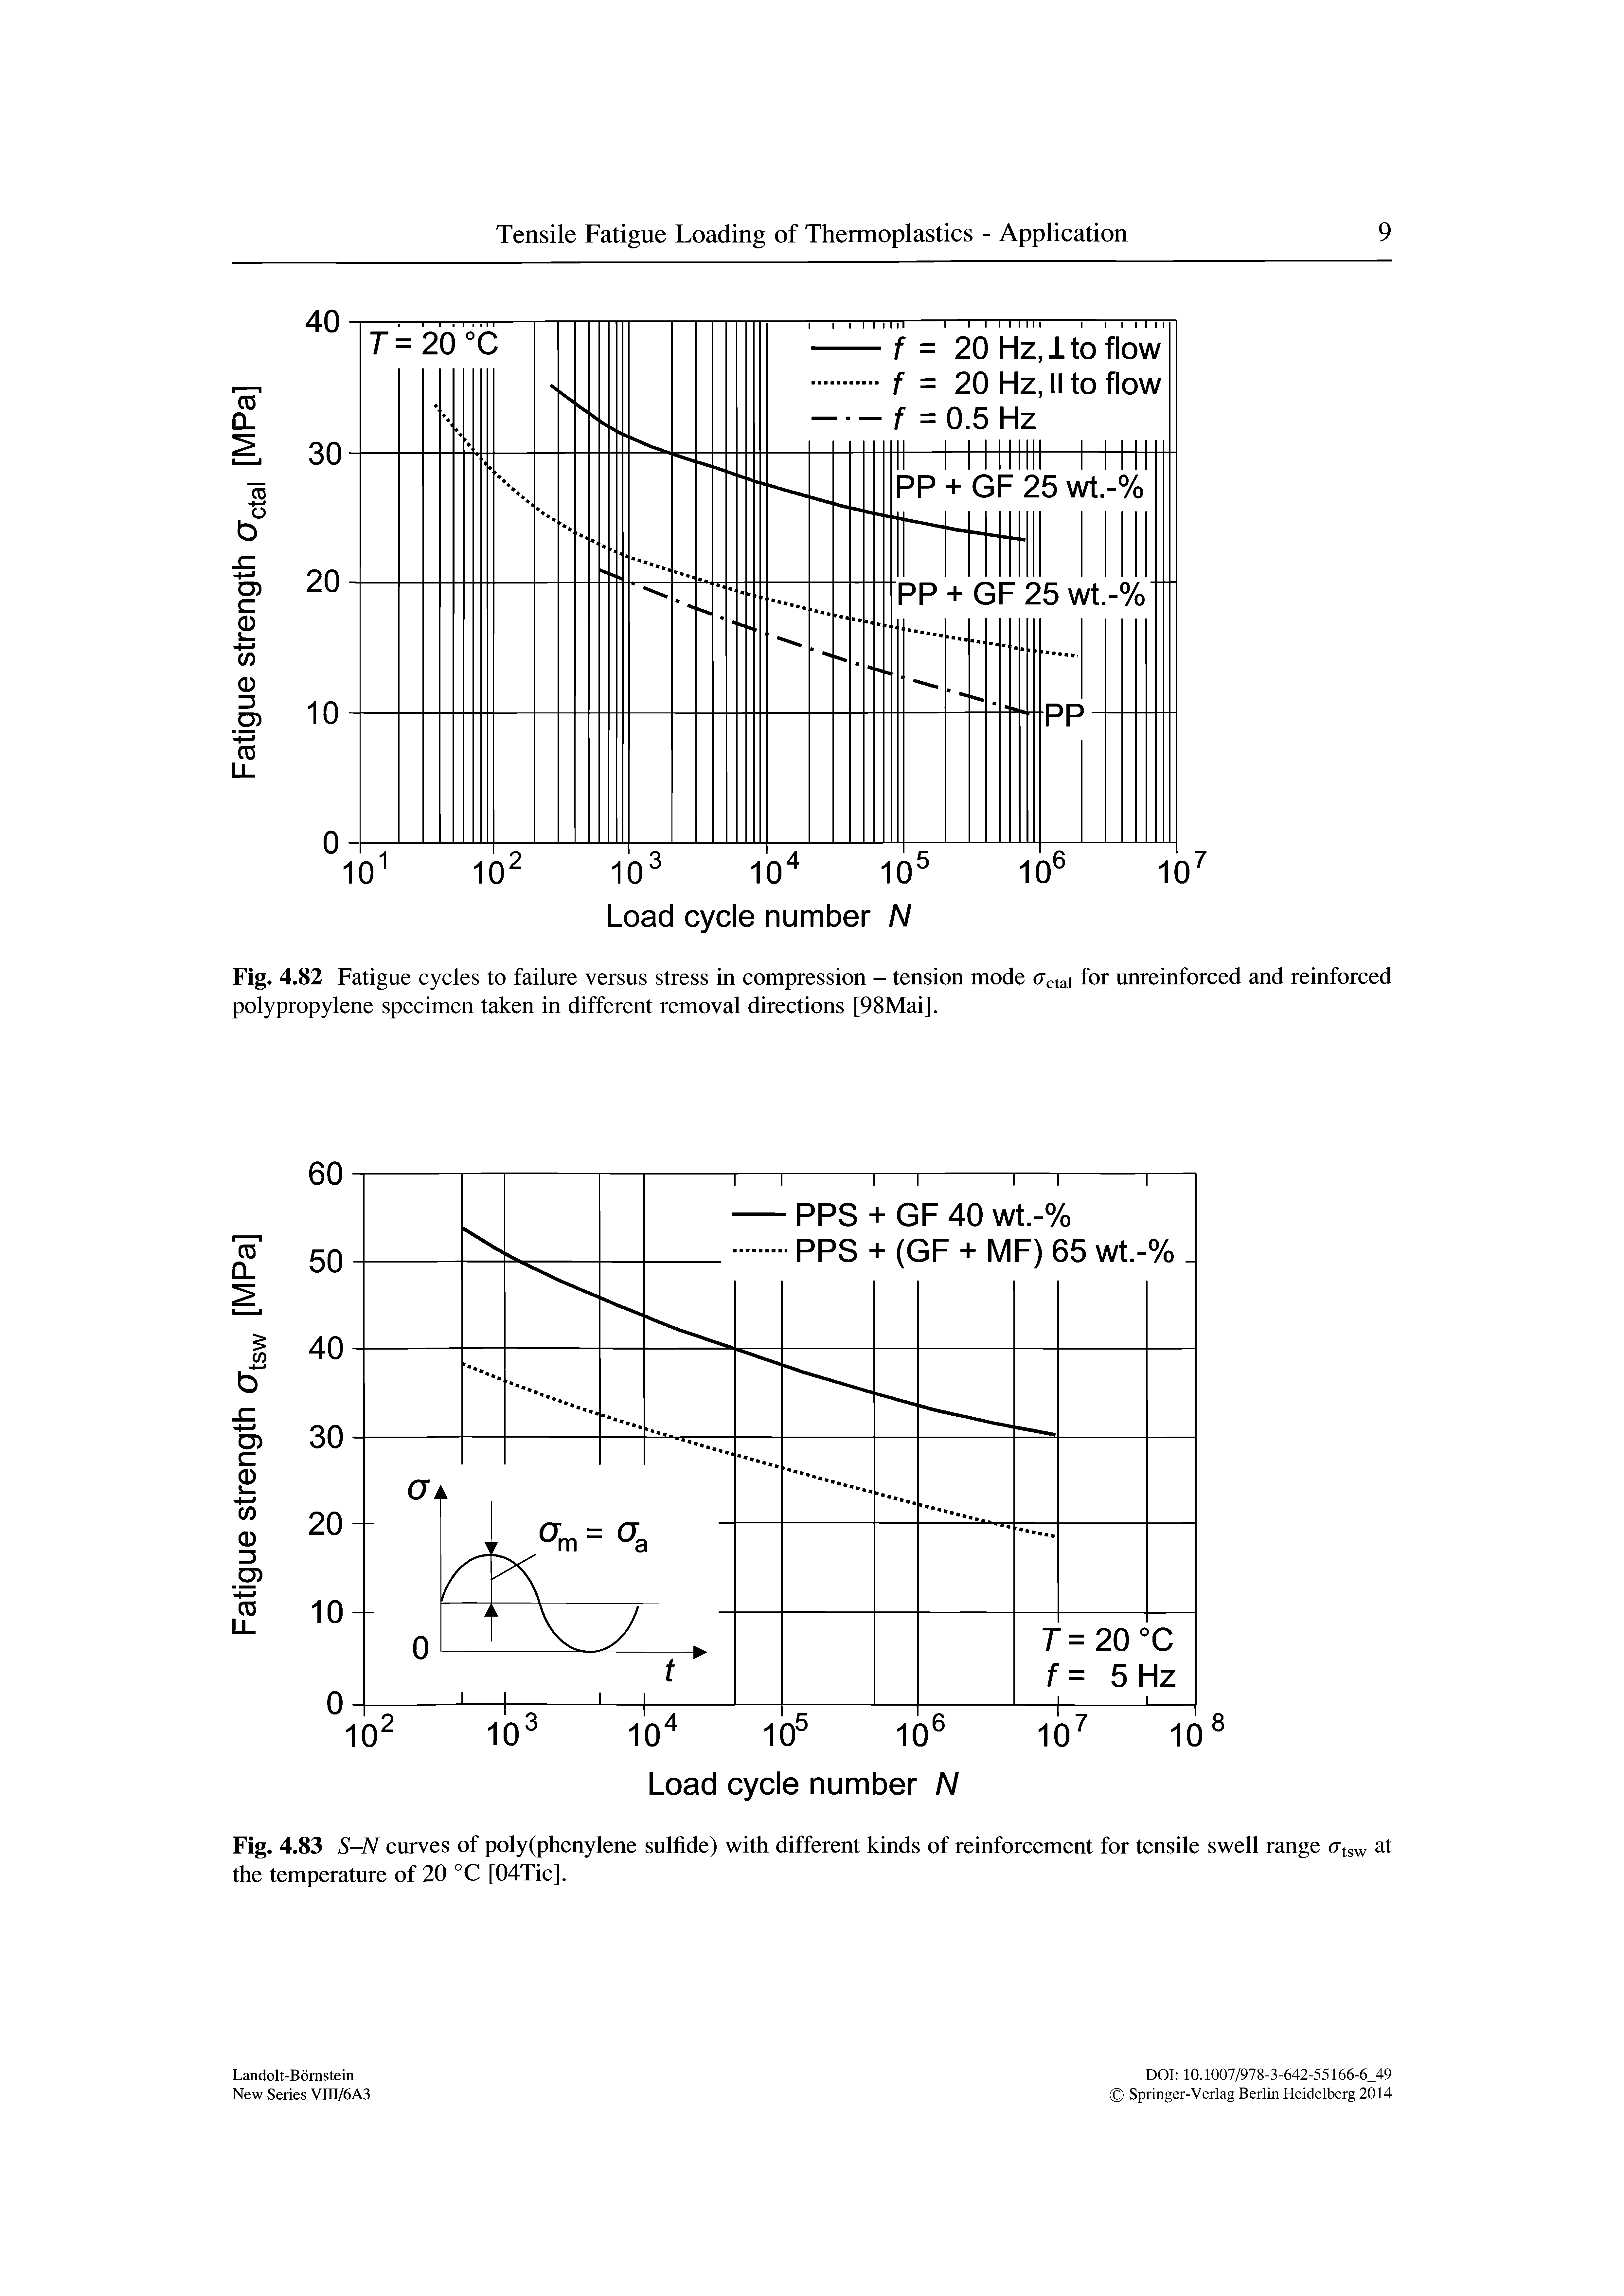 Fig. 4.82 Fatigue cycles to failure versus stress in compression - tension mode (Jctai for unreinforced and reinforced polypropylene specimen taken in different removal directions [98Mai].